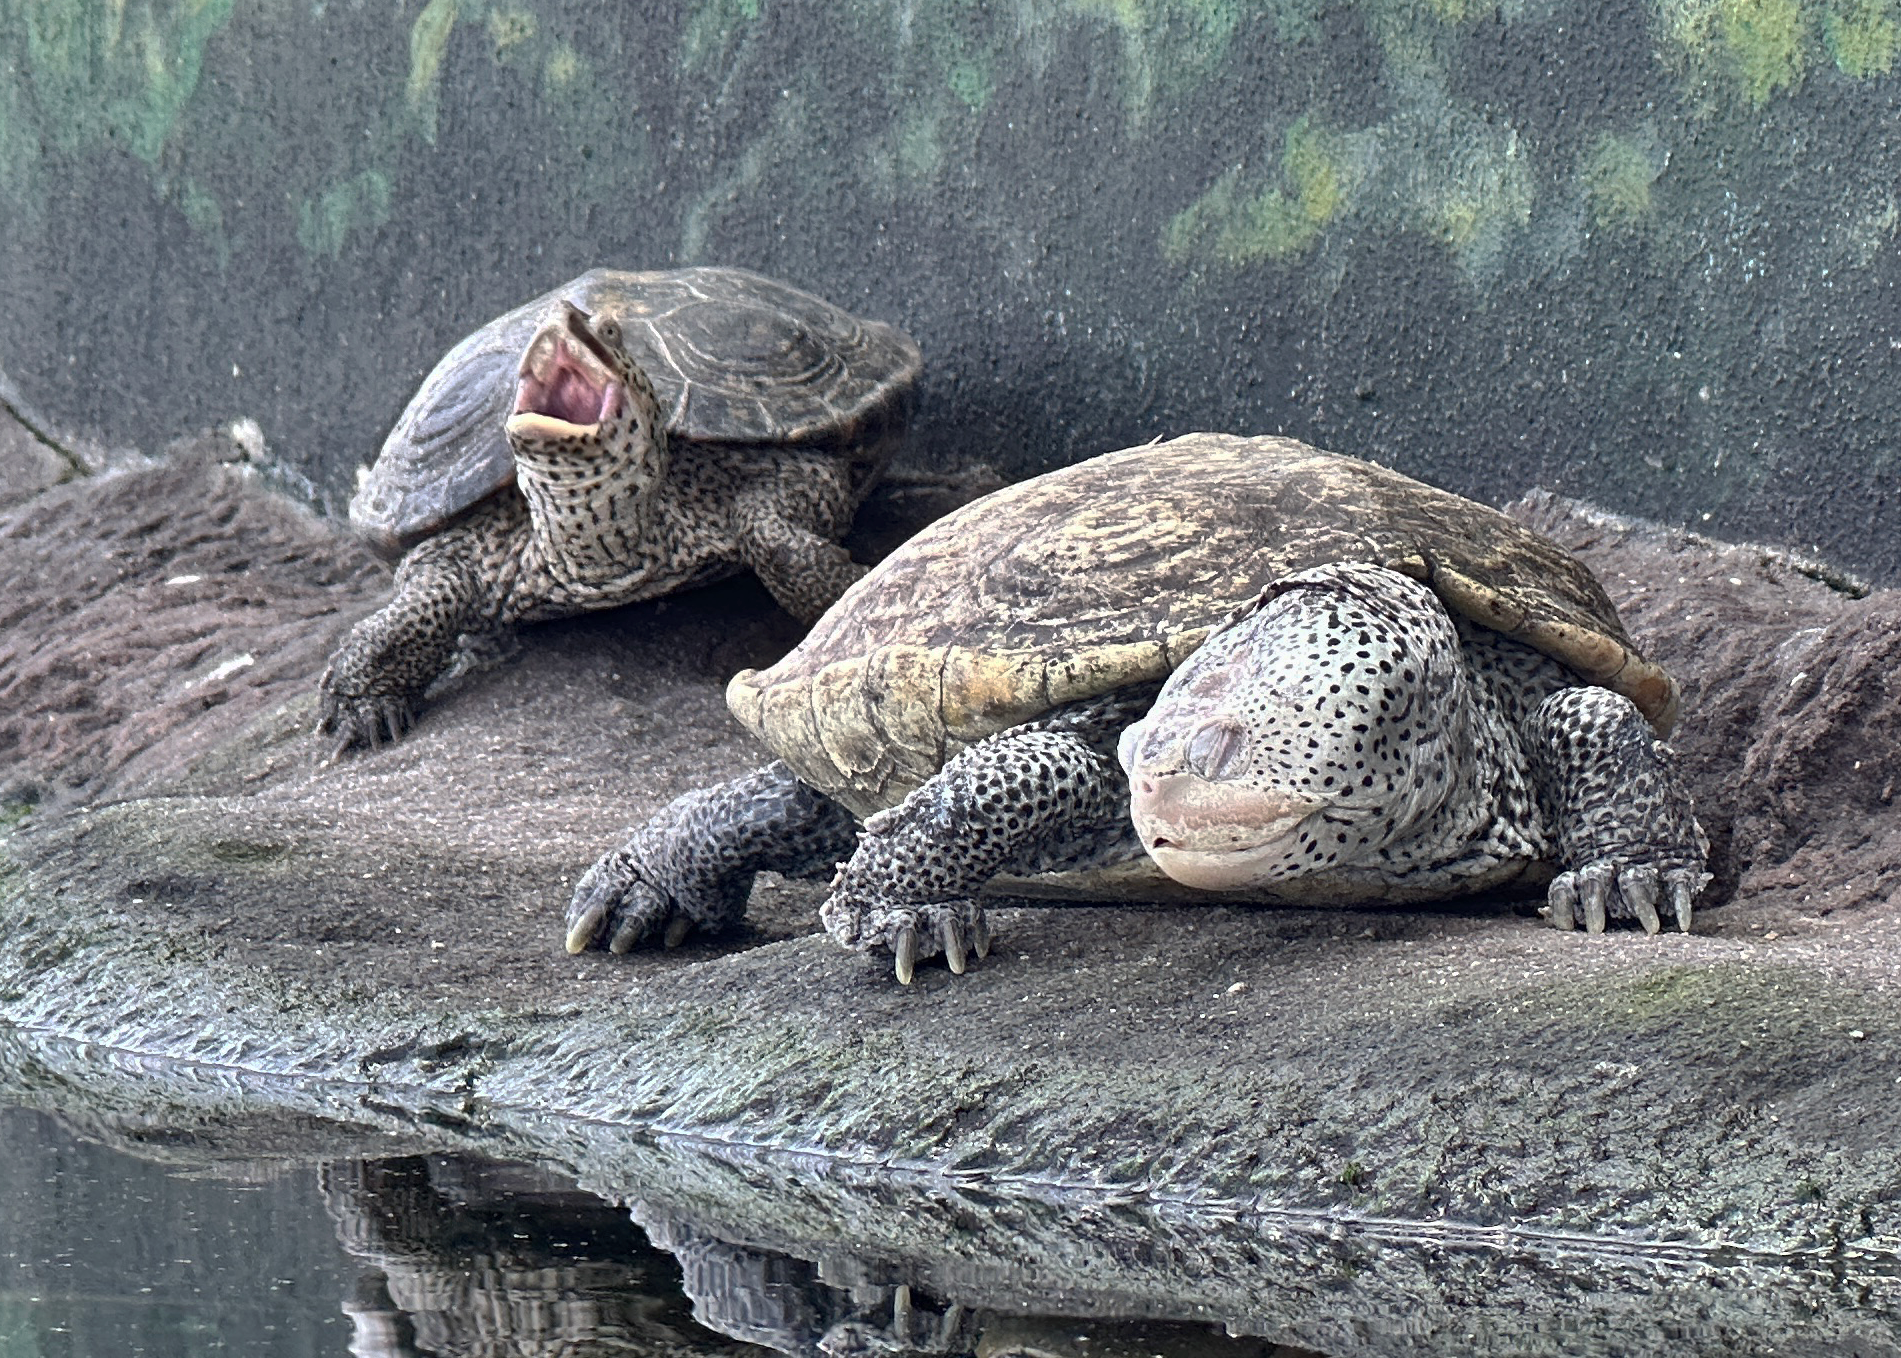 two diamondback terrapins sit on a ledge over water in their exhibit at the South Carolina Aquarium